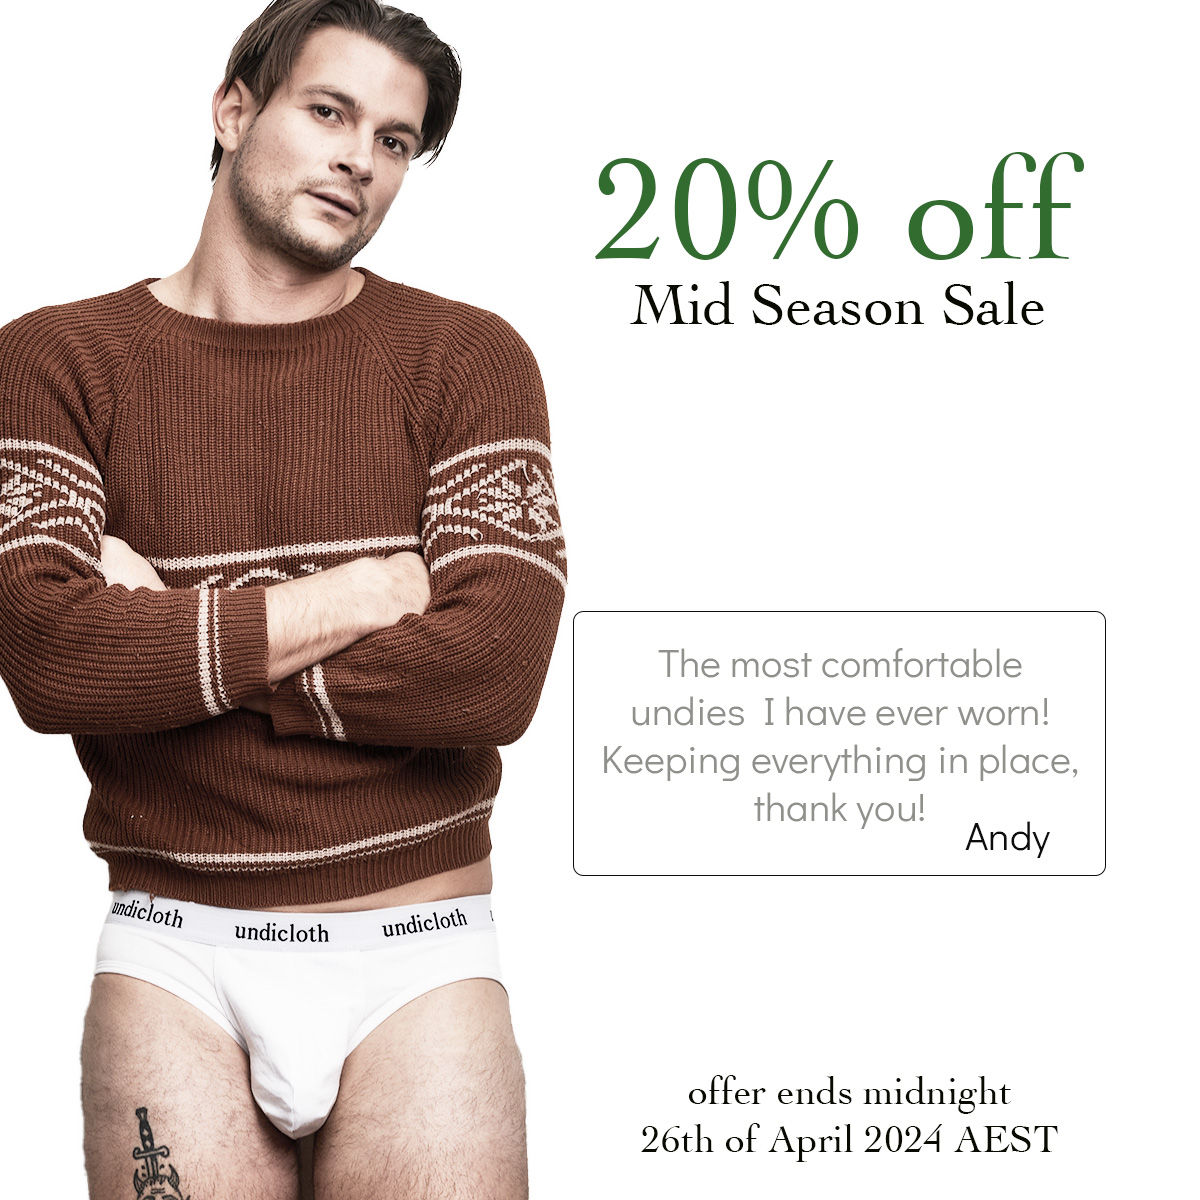 Don't Miss Out on our Mid Season Sale!!🙌🙌
Get 20% off Storewide until 26th of April 2024 AEST.
Discount will auto apply in checkout.

#undicloth #underwear #madeinaustralia #smallbusiness #sale #midseasonsale #undies